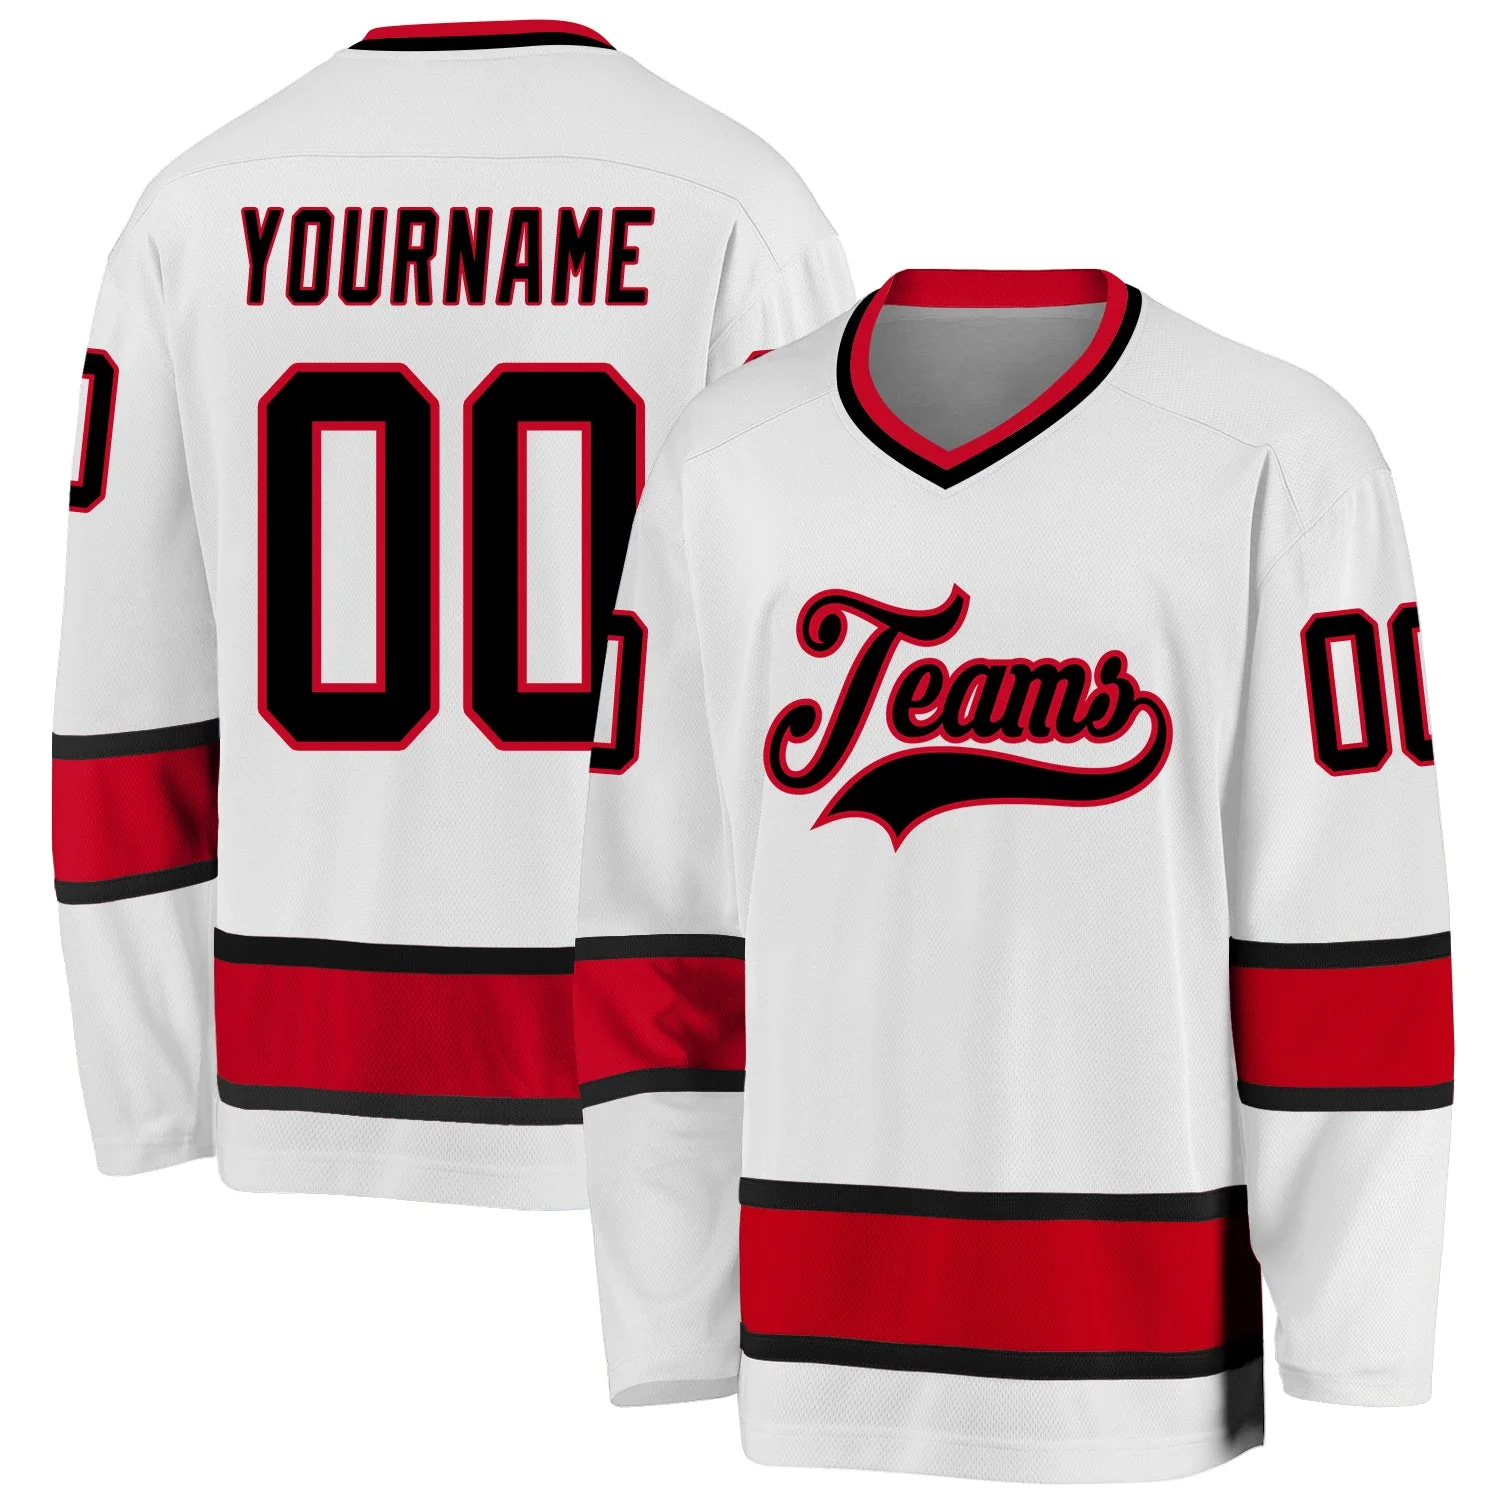 Stitched And Print White Black-red Hockey Jersey Custom